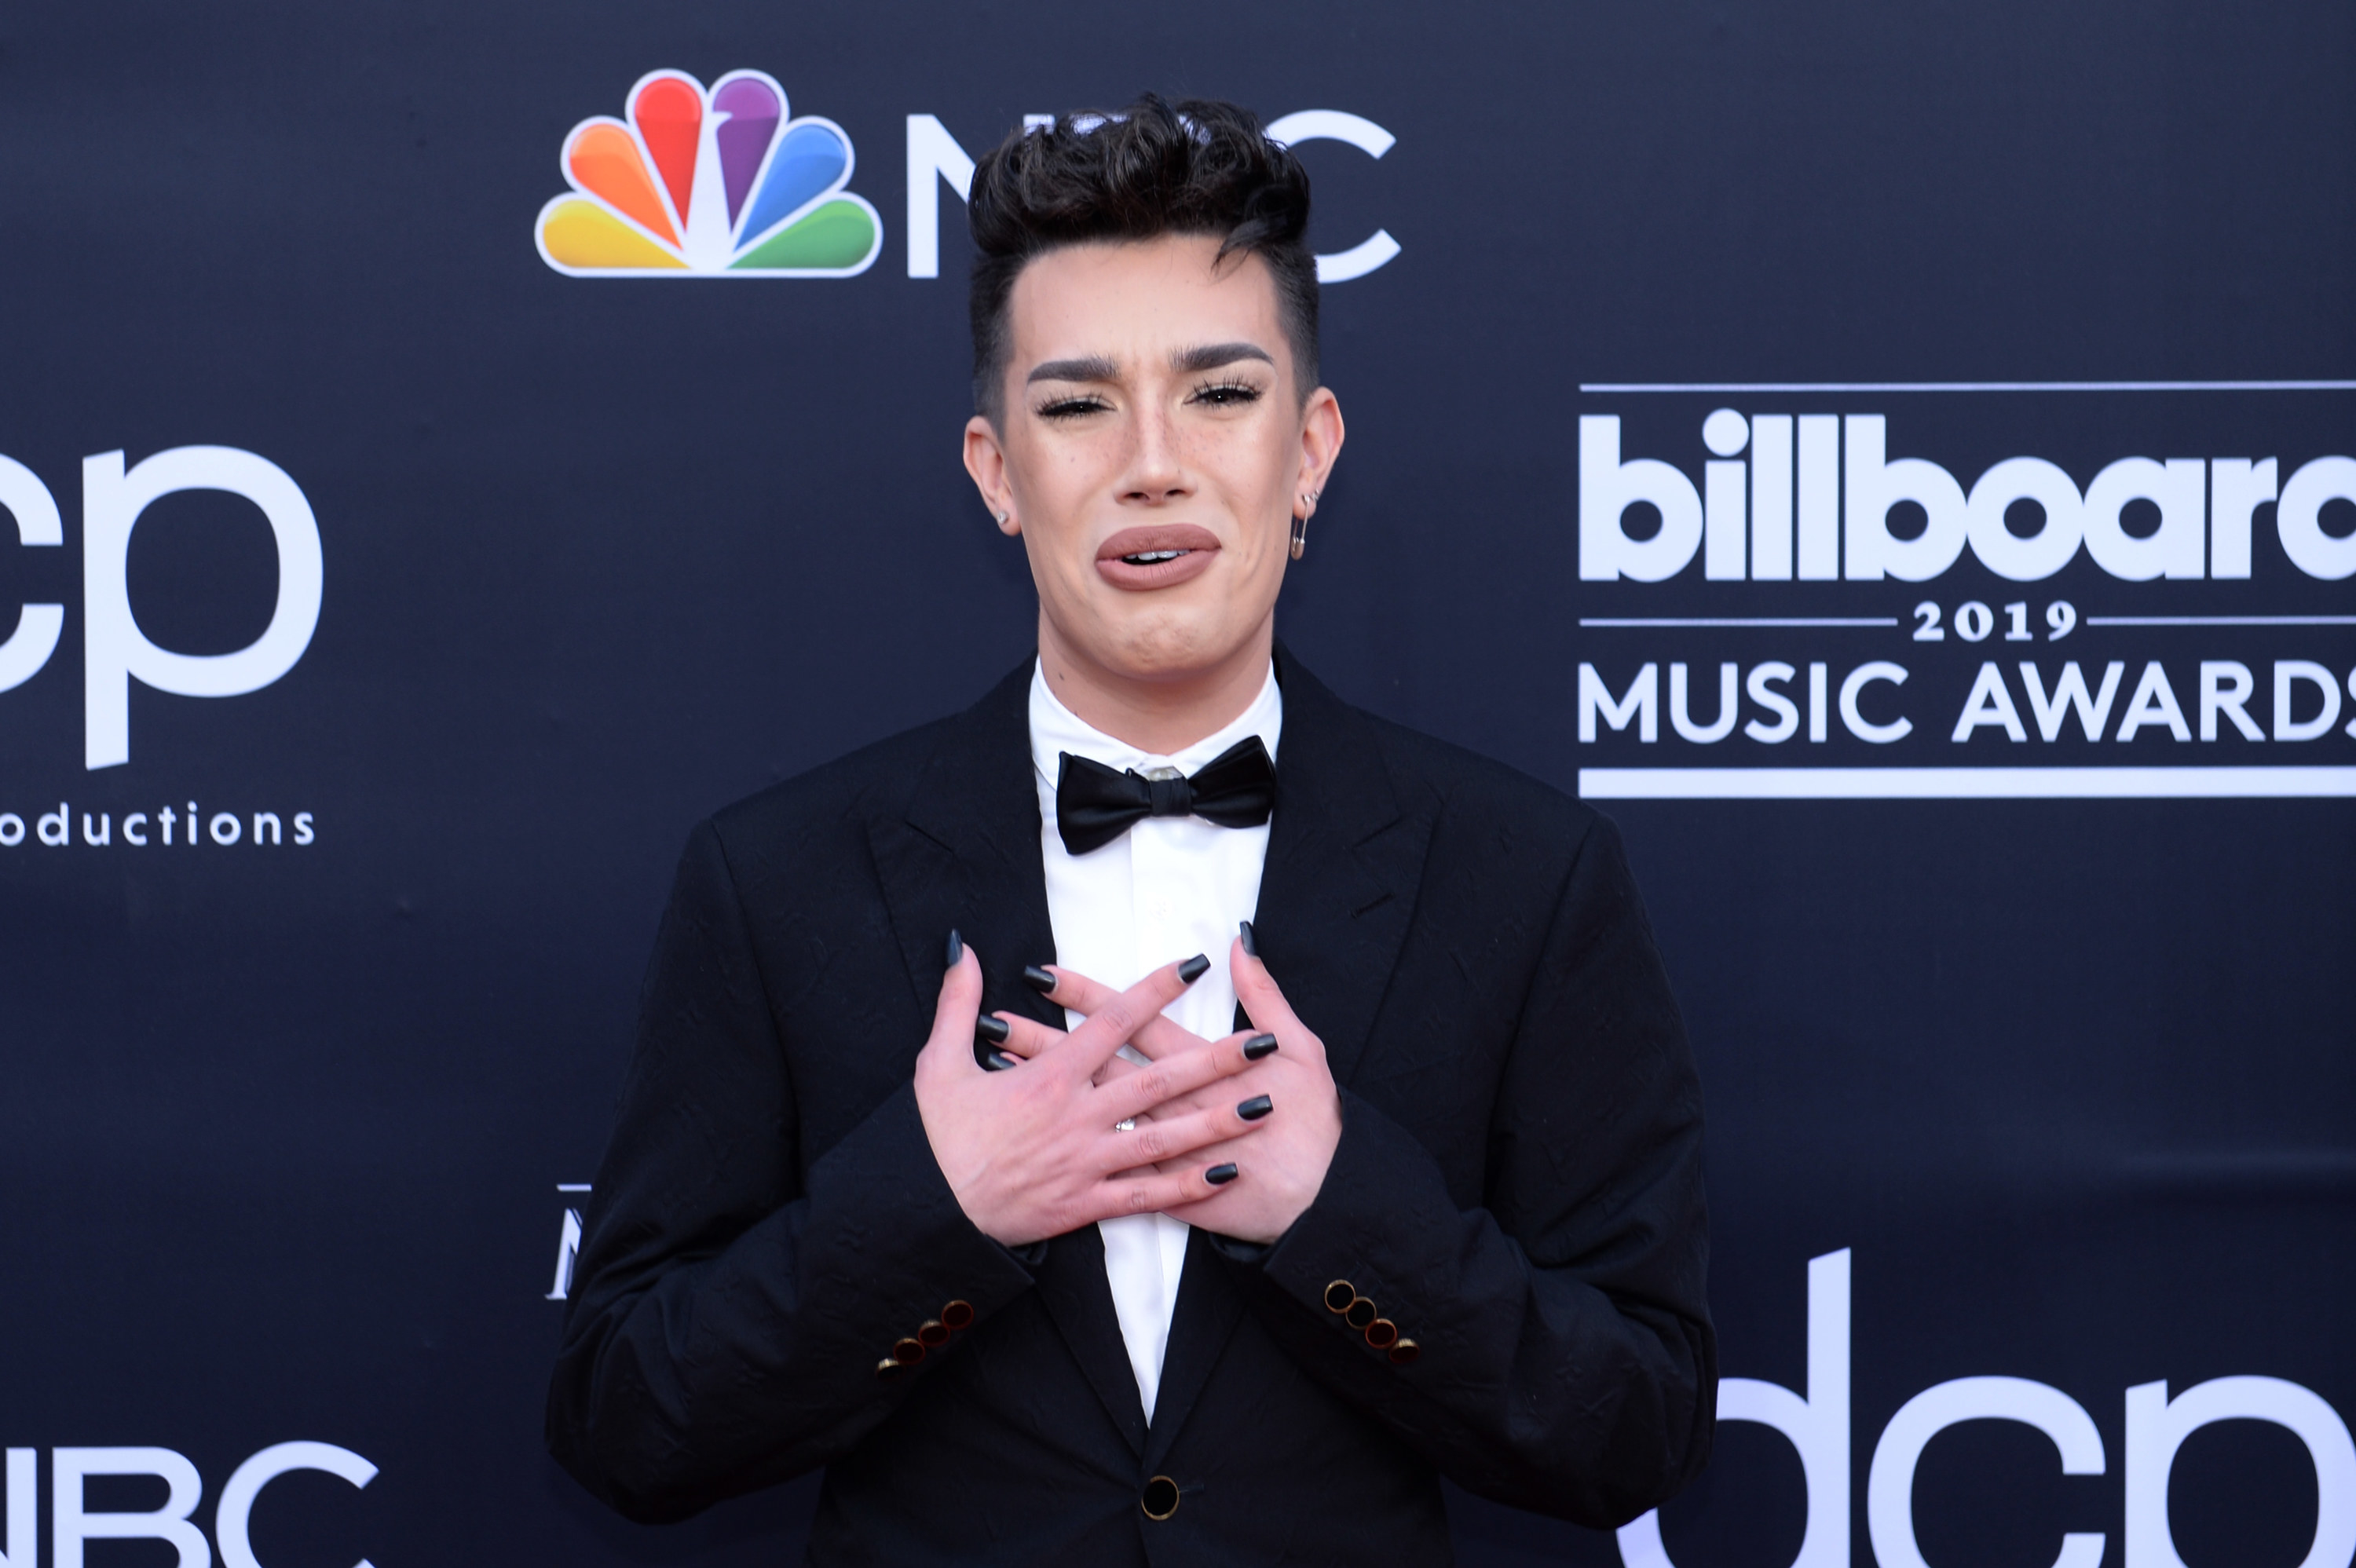 James in a tux at the 2019 Billboard music awards